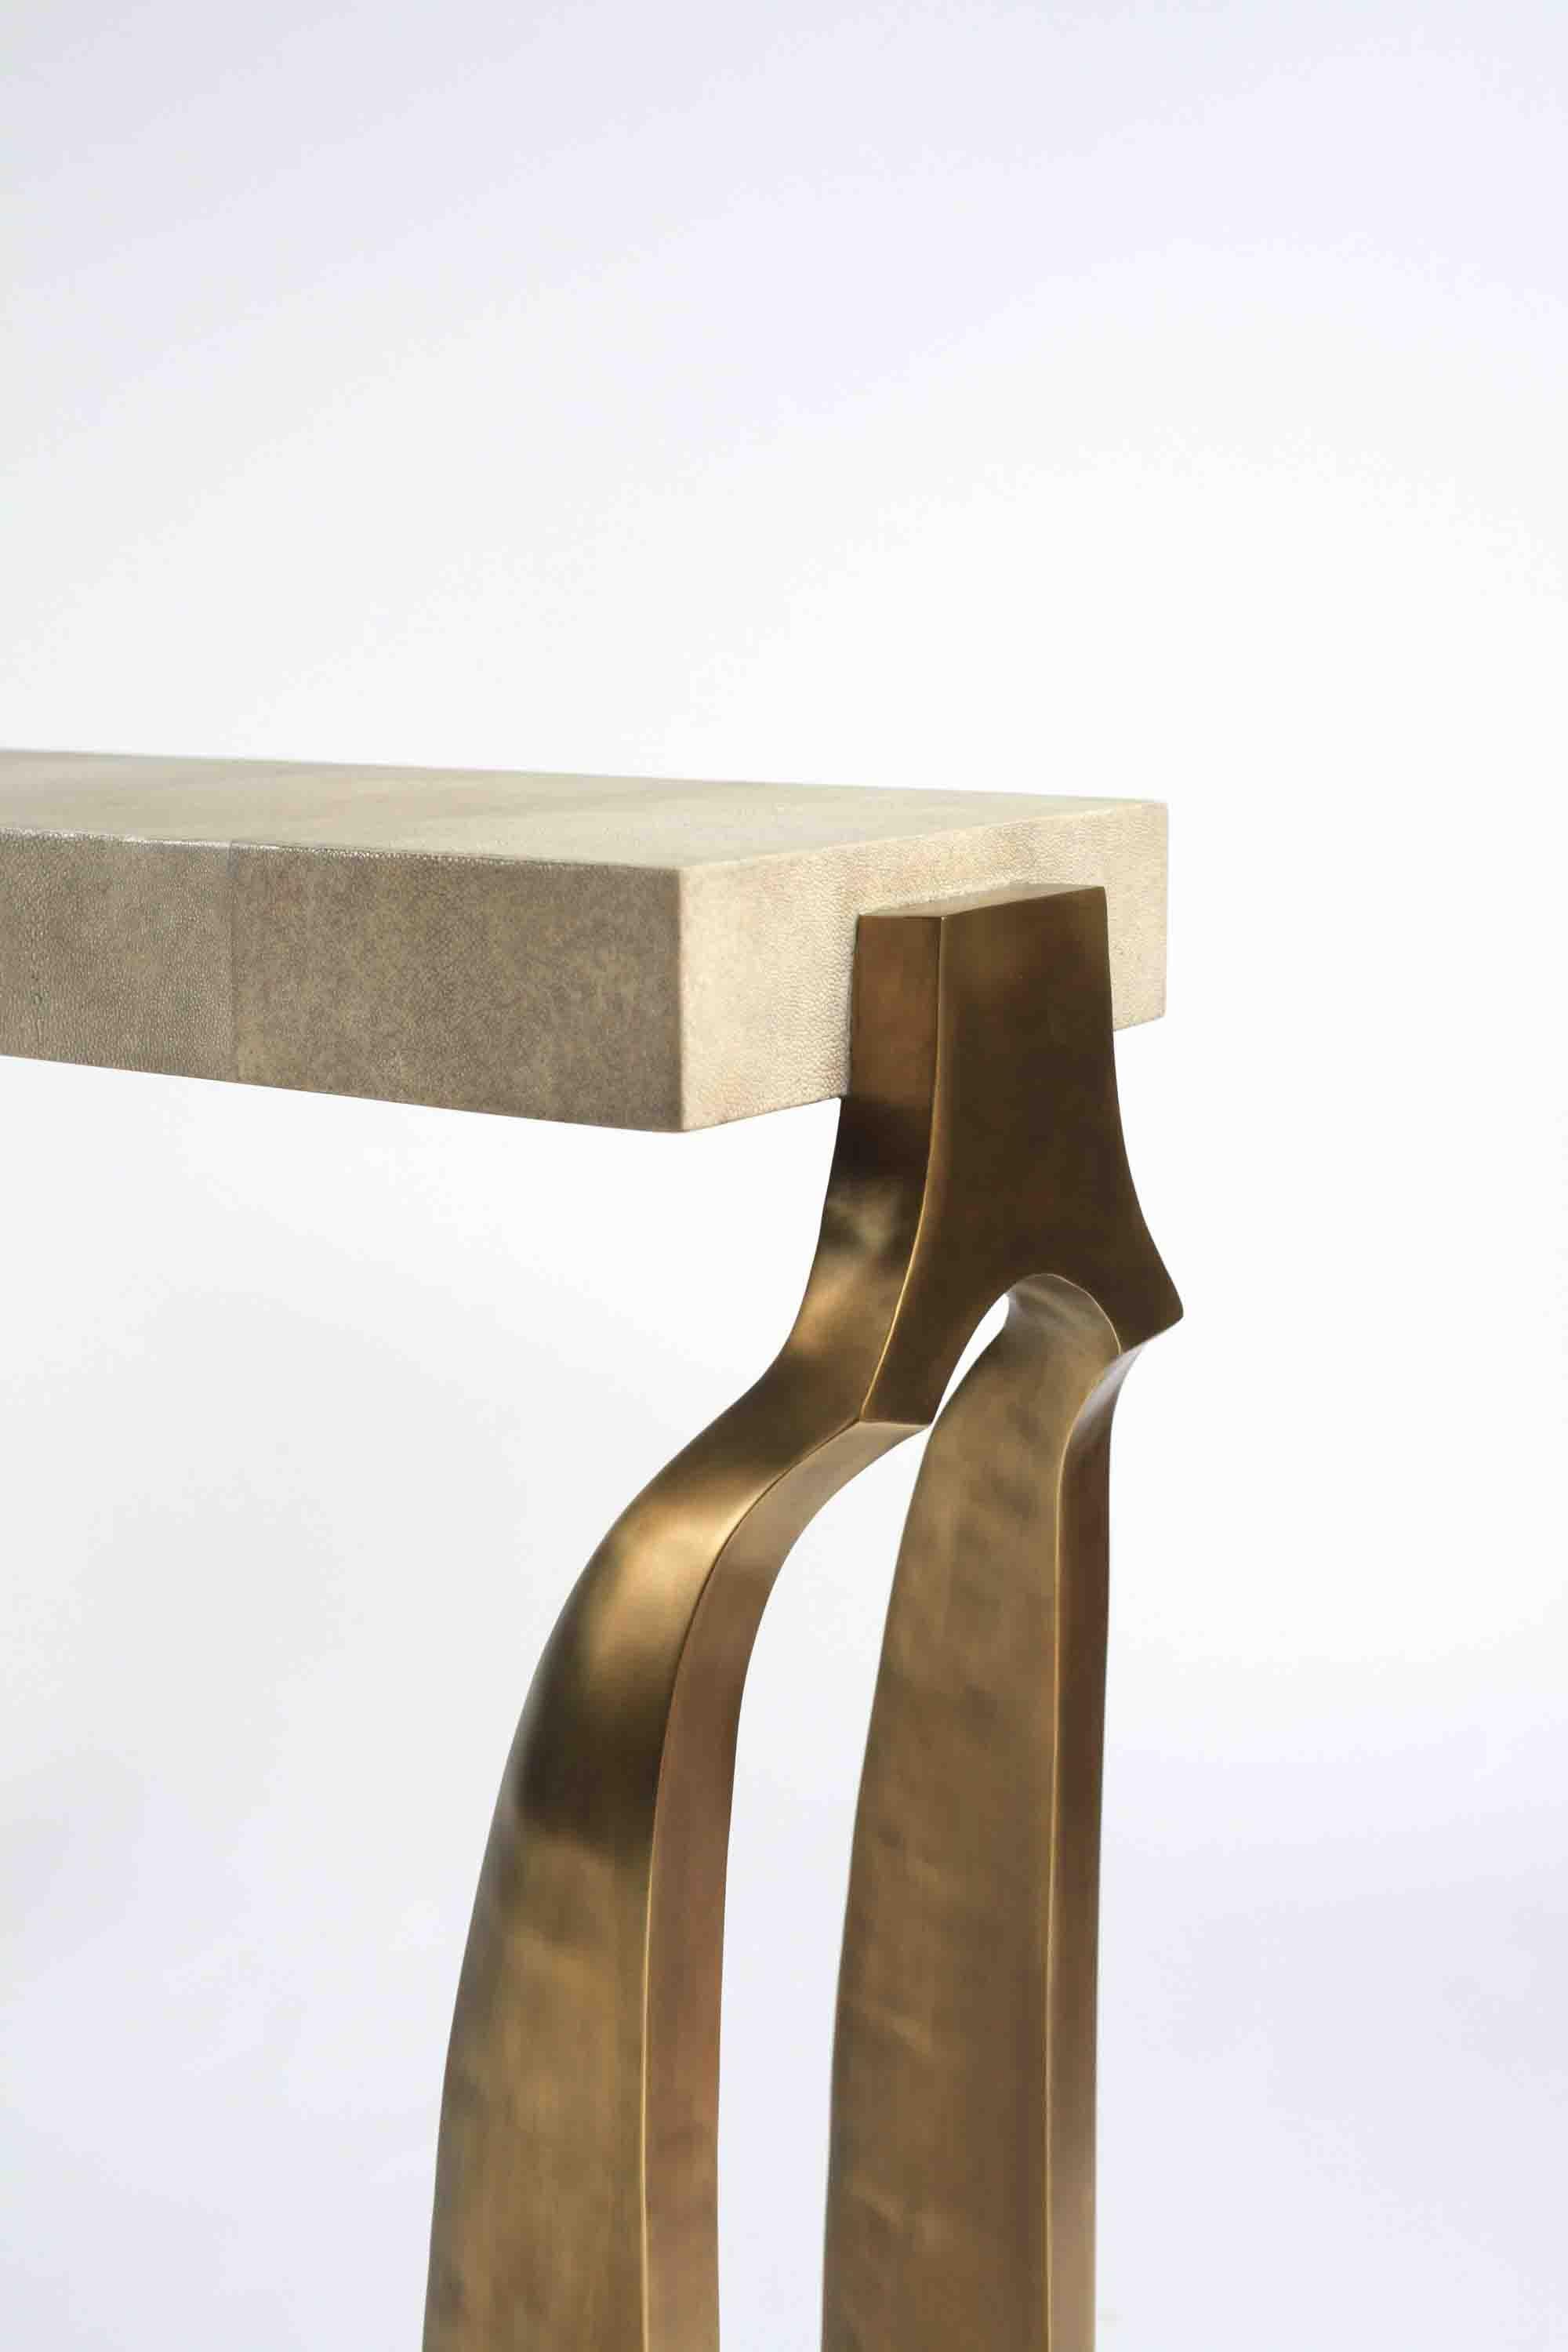 THIS LISTING IS FOR ONE GALAXY CONSOLE AND A PAIR OF WALDORF BEDSIDE TABLES.

The Galaxy console table is both dramatic and organic it’s unique design. The cream shagreen inlaid top sits on a pair of ethereal and sculptural bronze-patina brass legs.